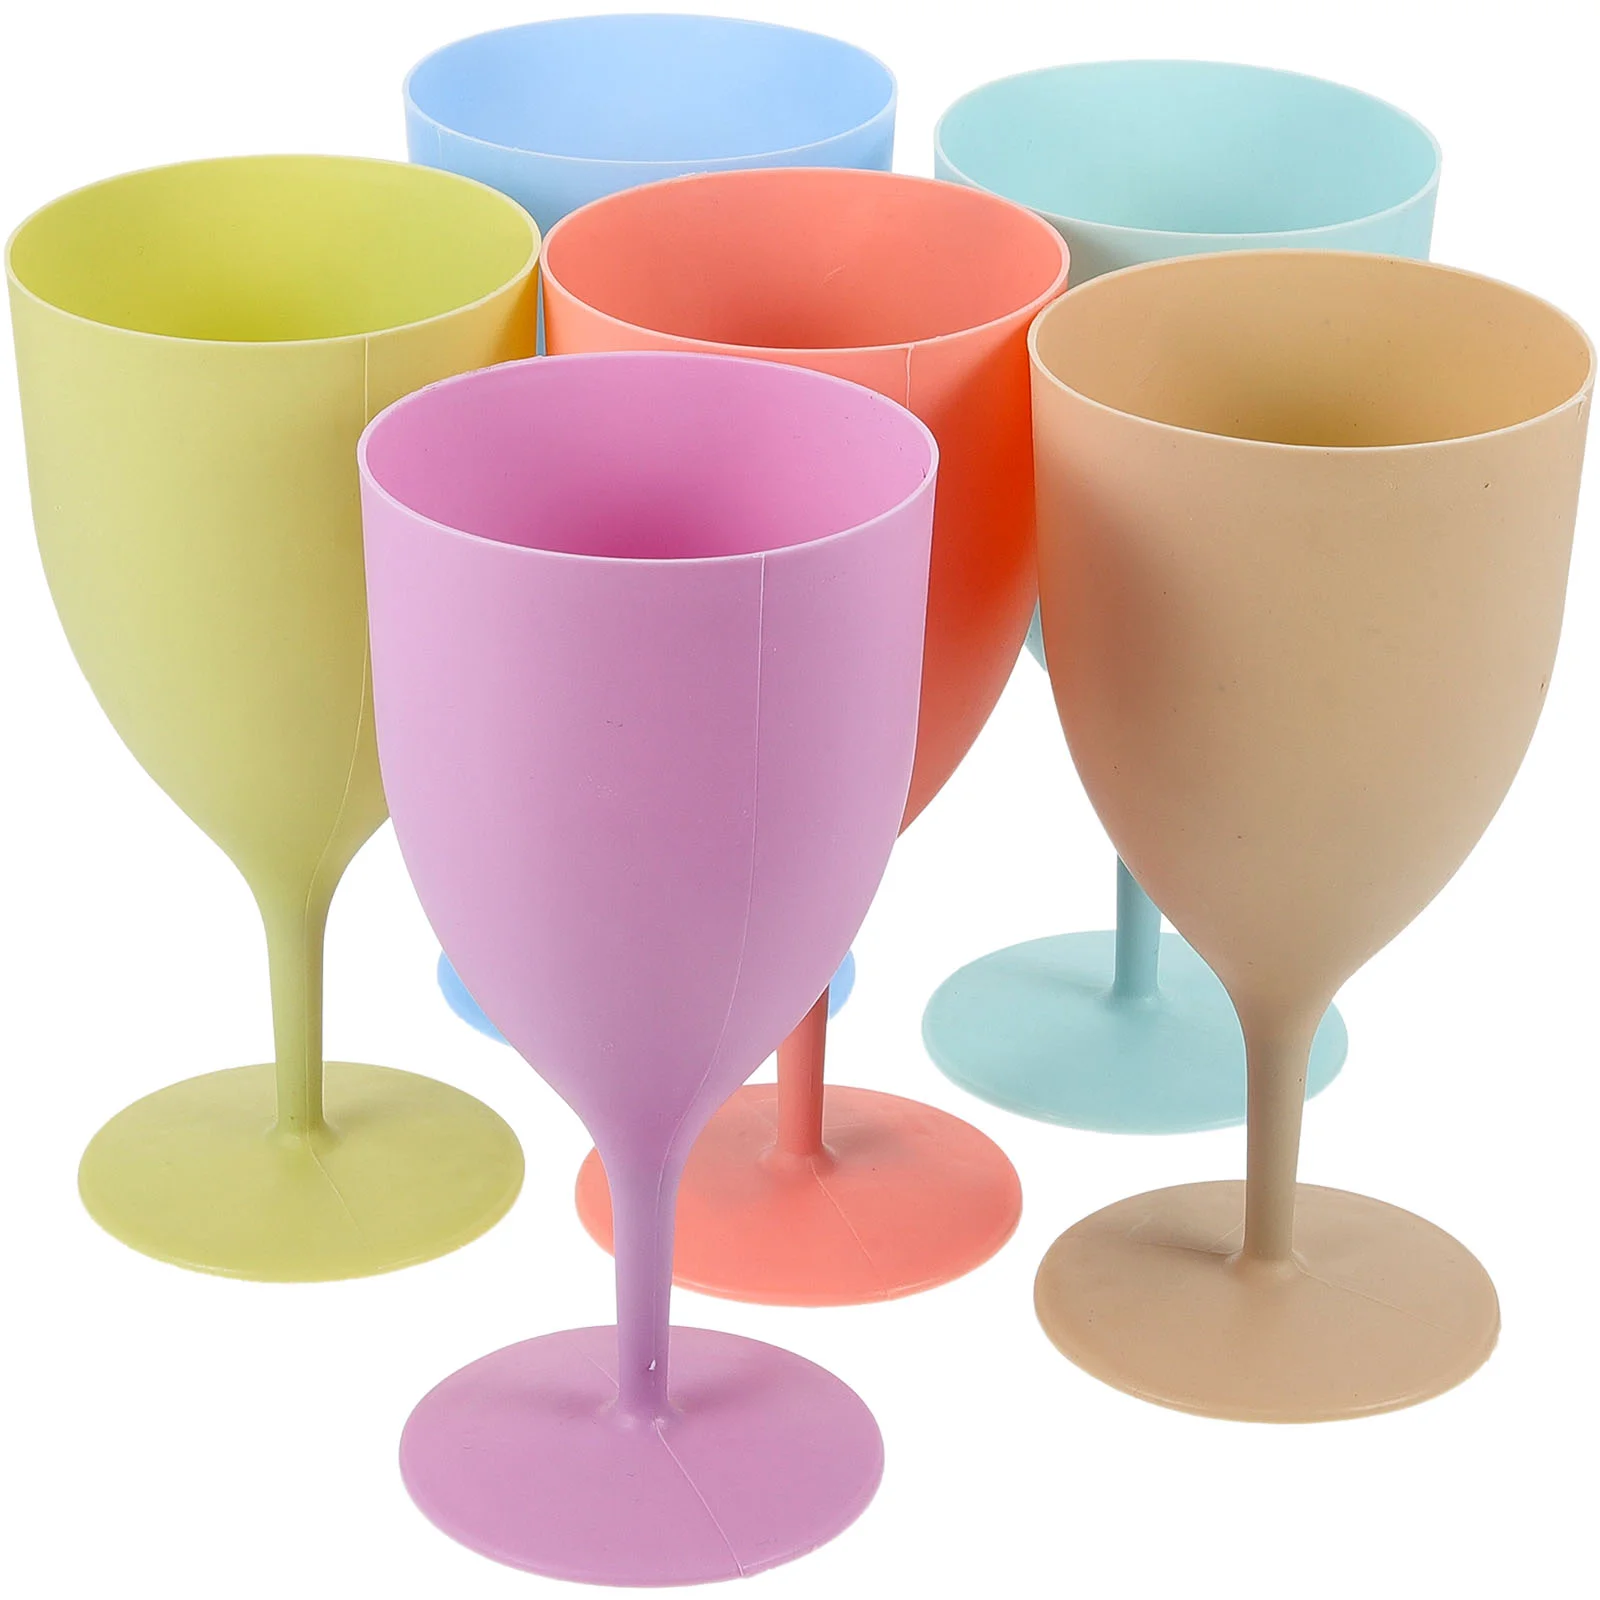 

6 Pcs Tall Juice Glass Plastic Flutes High Capacity Champagne Goblets Cups Wedding Party Child Glasses